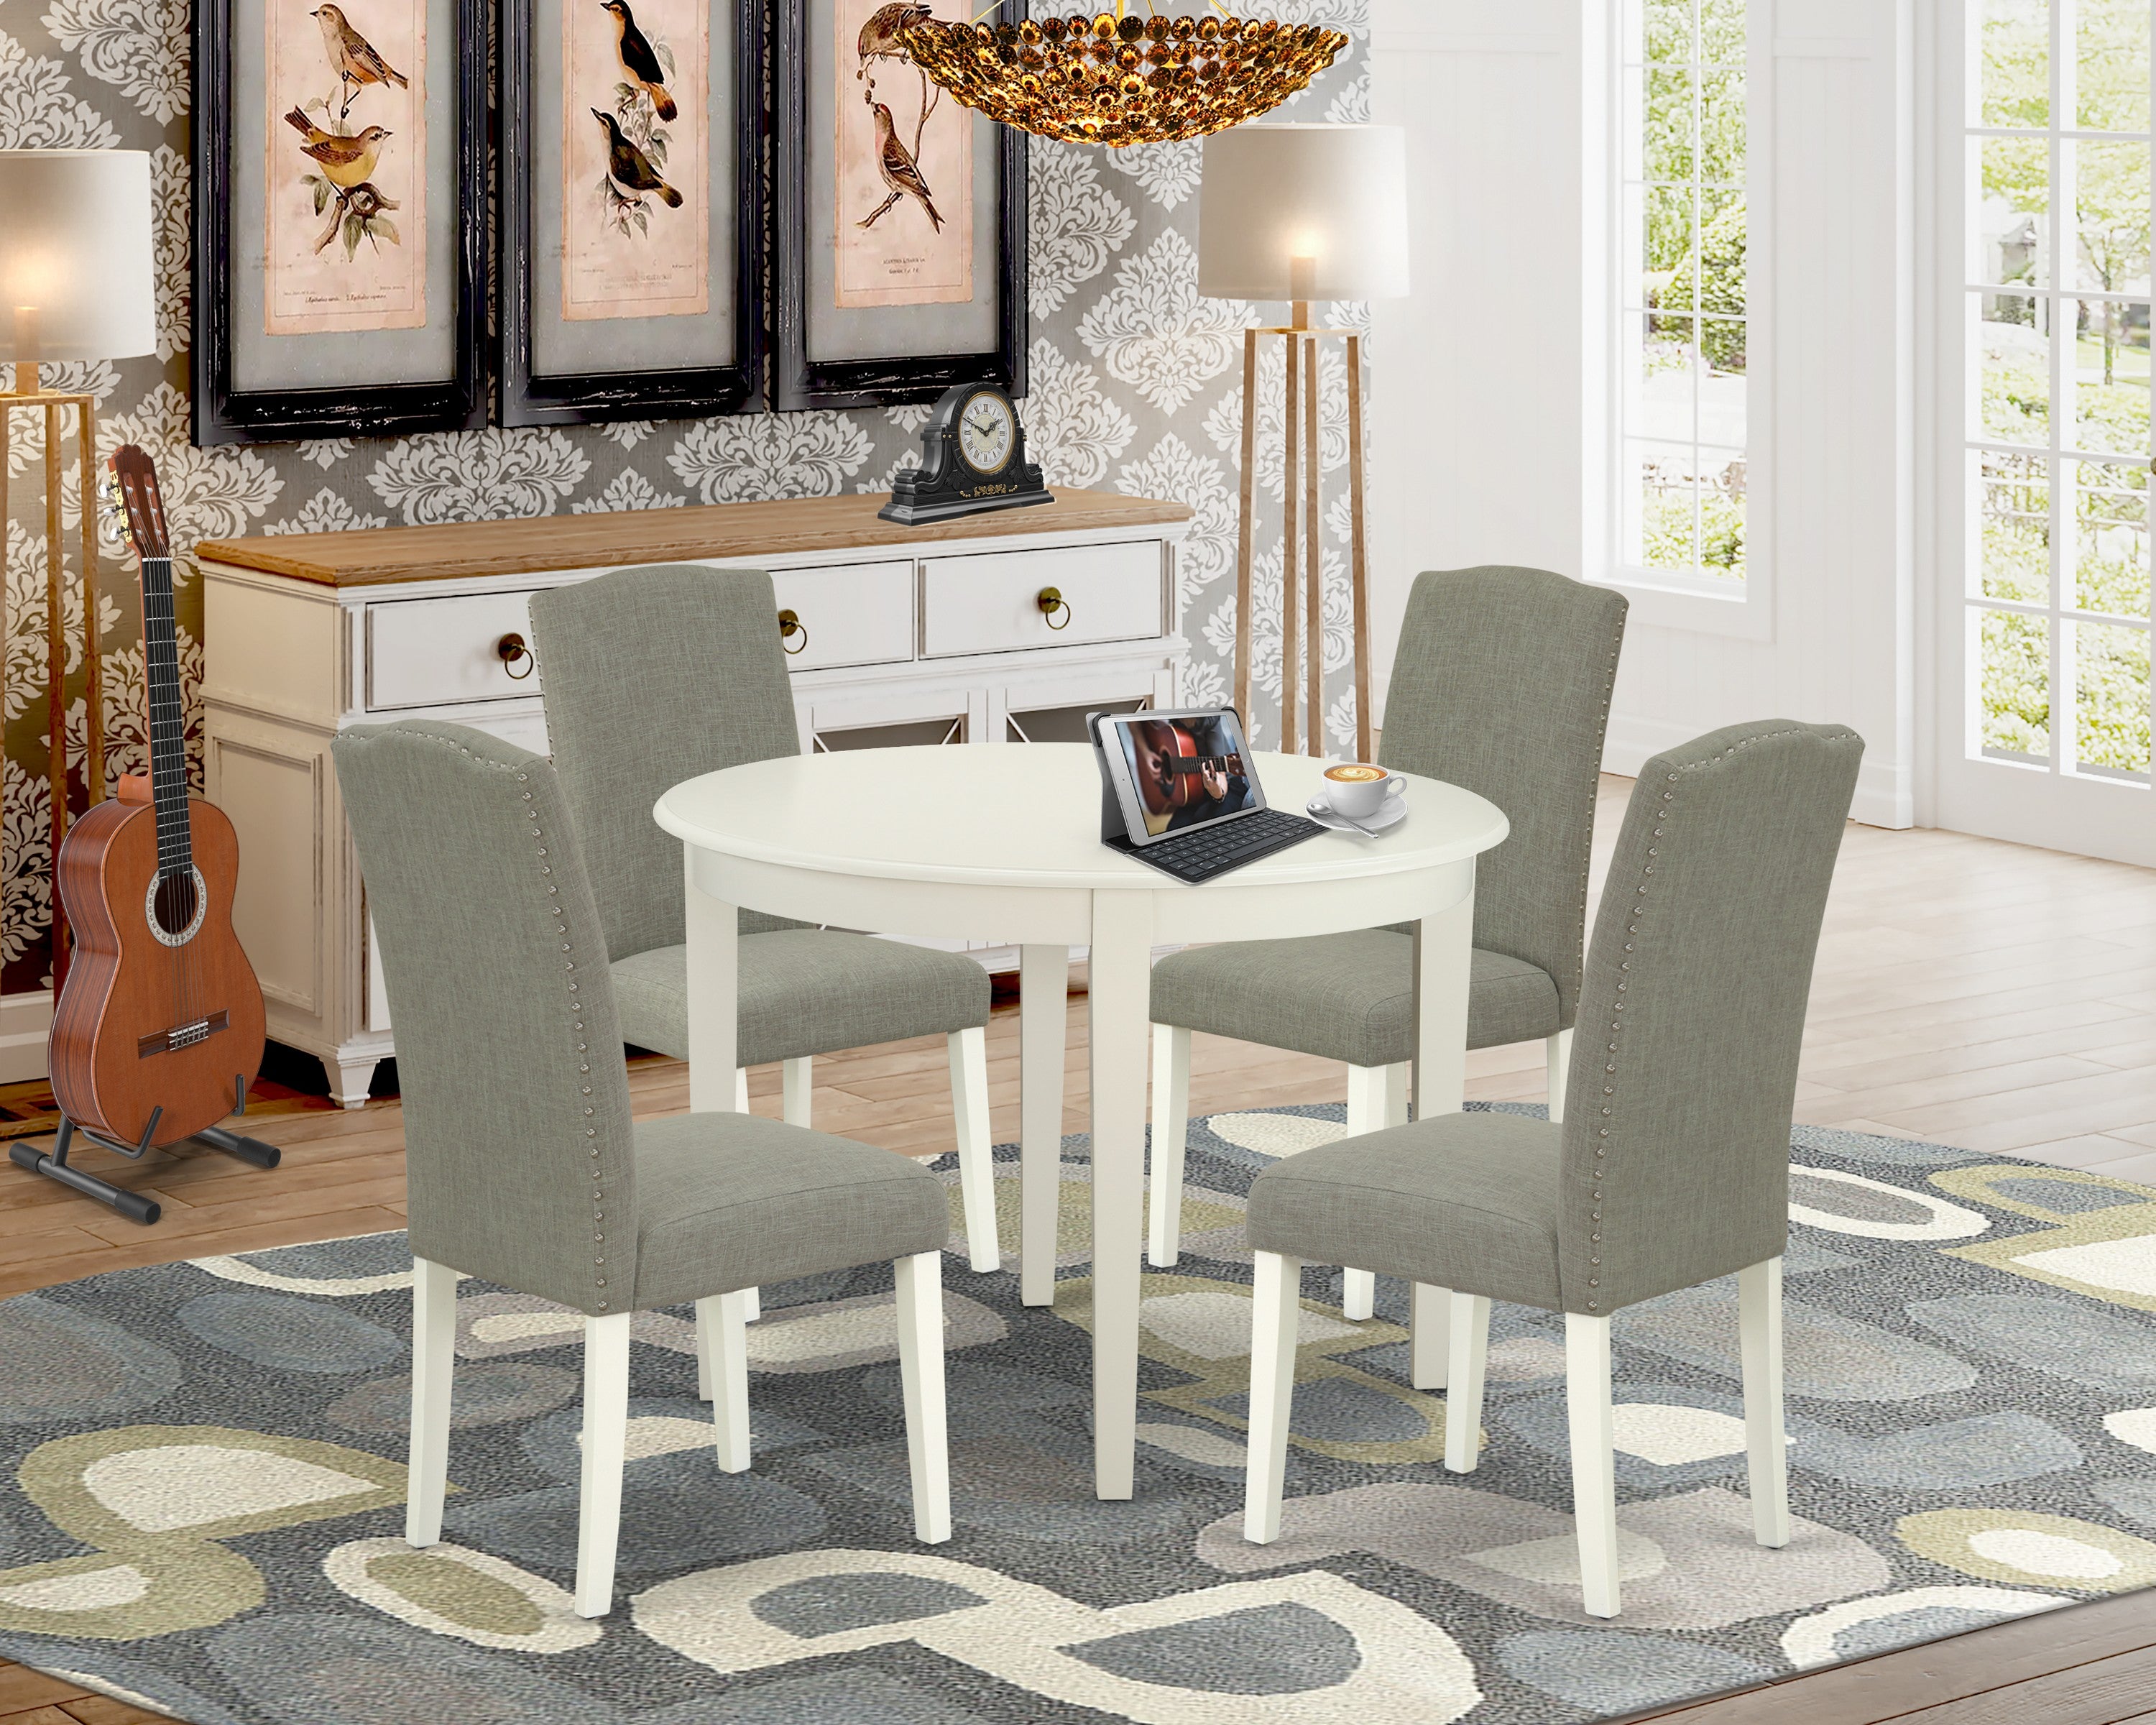 BOEN5-LWH-06 5Pc Round 42" Kitchen Table And Four Parson Chair With Linen White Leg And Linen Fabric Dark Shitake